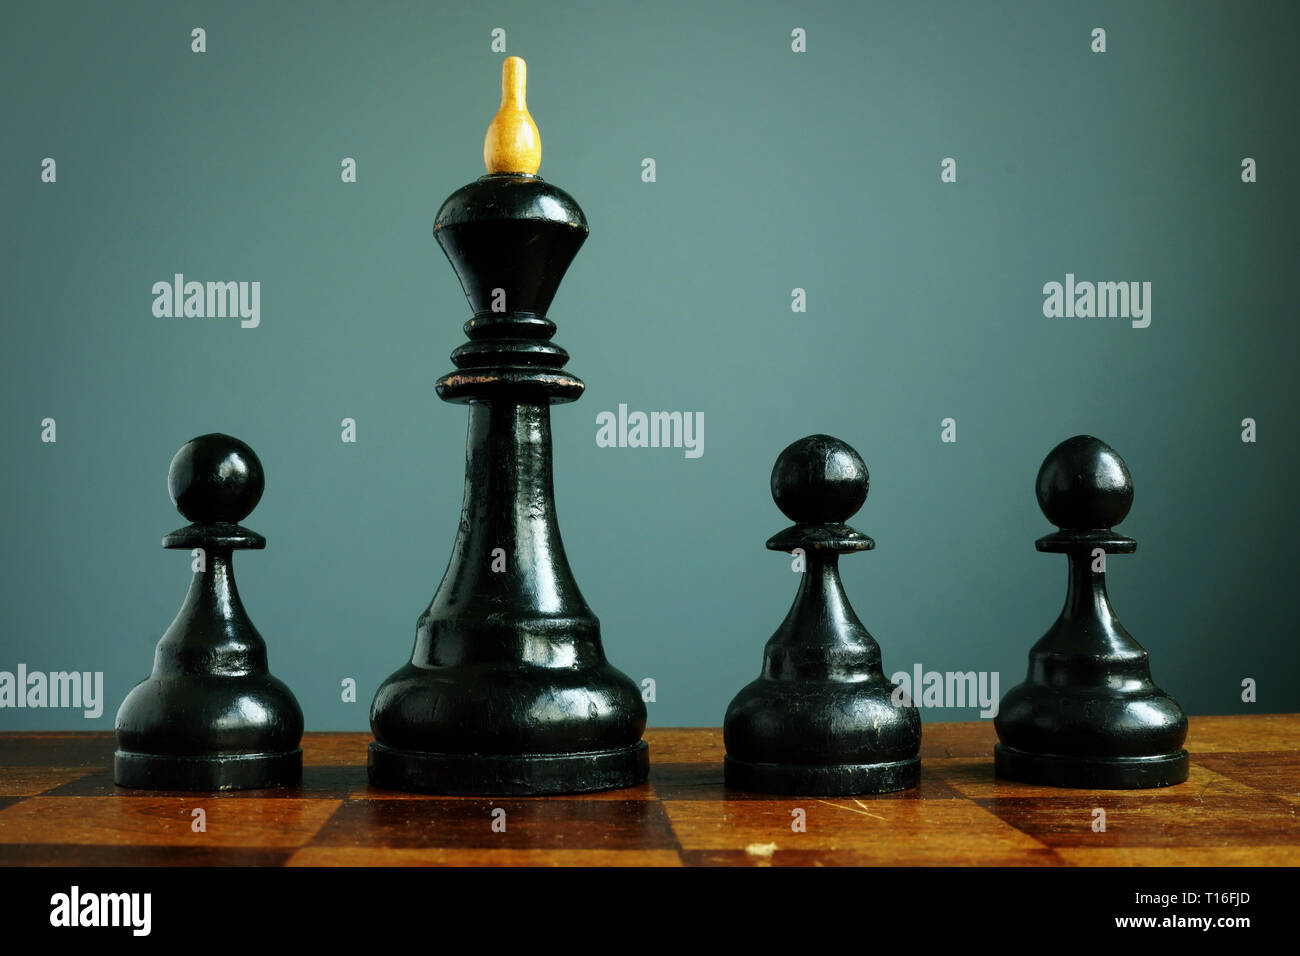 Competitive edge or business advantage in recruitment. Pawns and chess king. Stock Photo